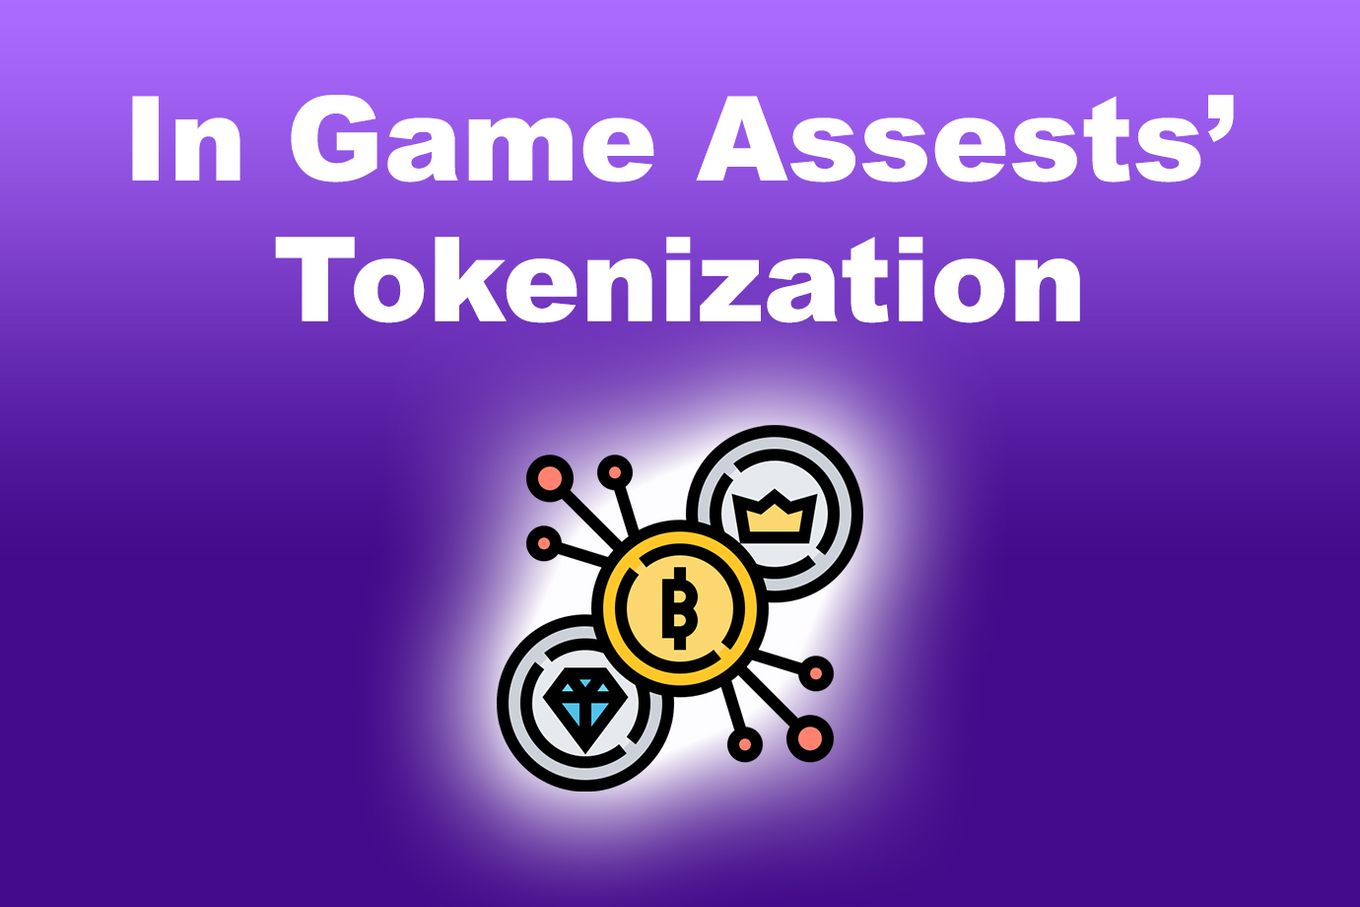 In-Game Assets’ Tokenization